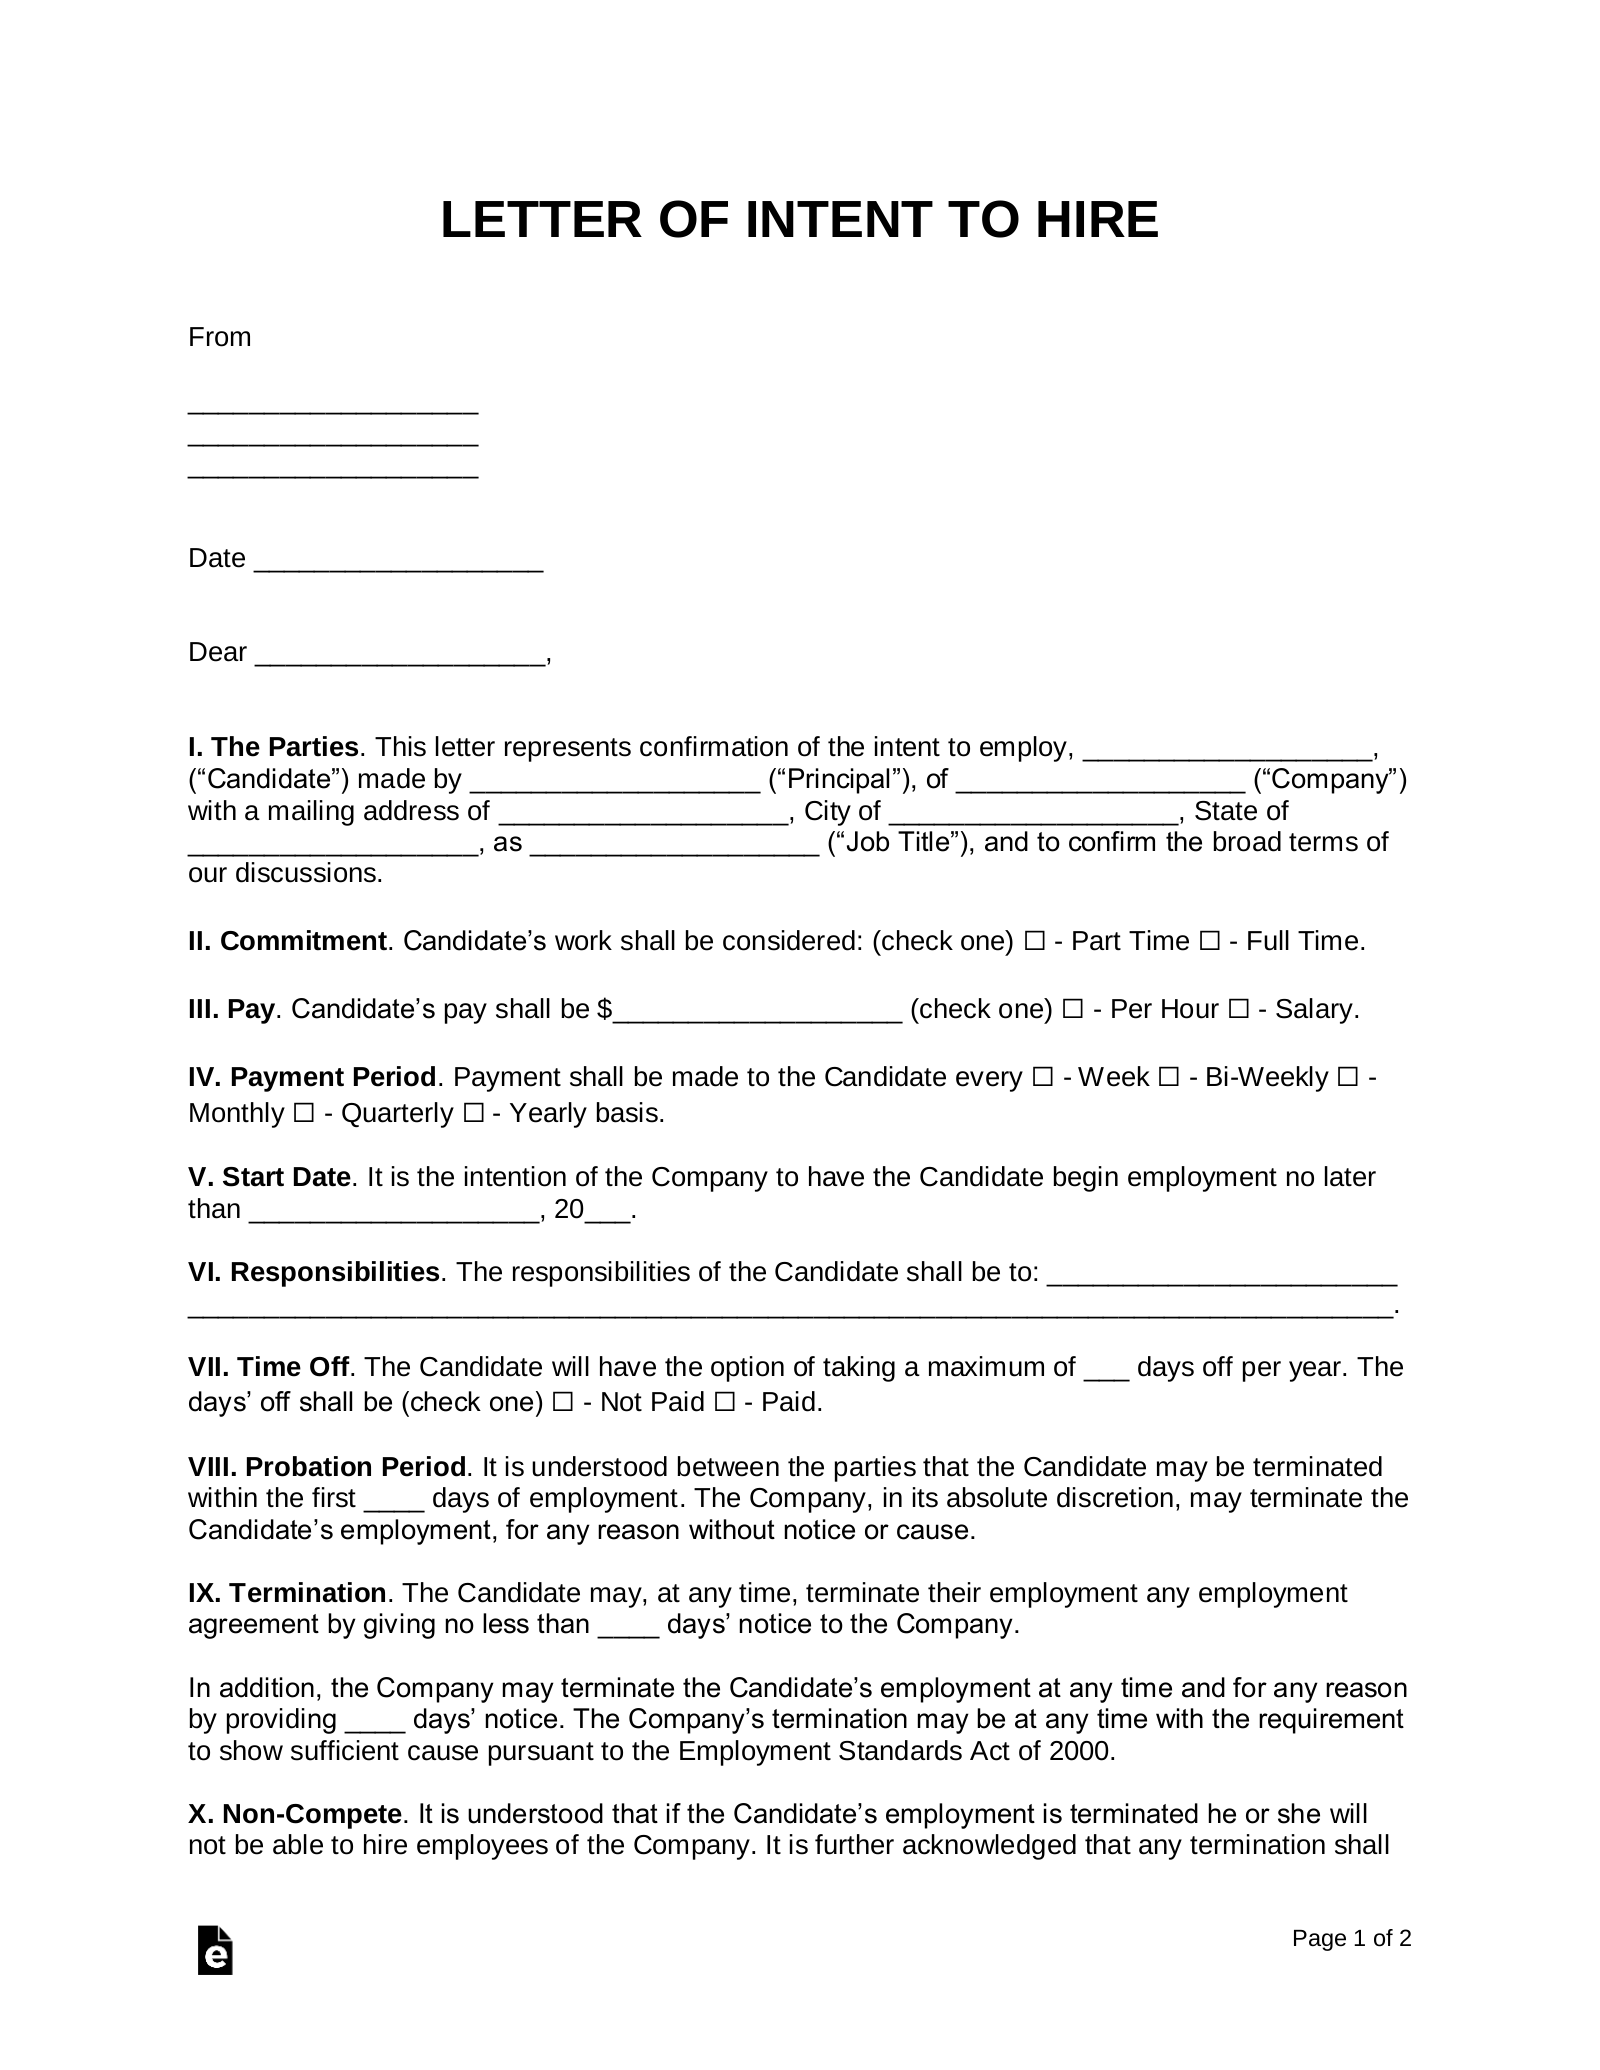 Sample Letter Of Intent For Wills from eforms.com